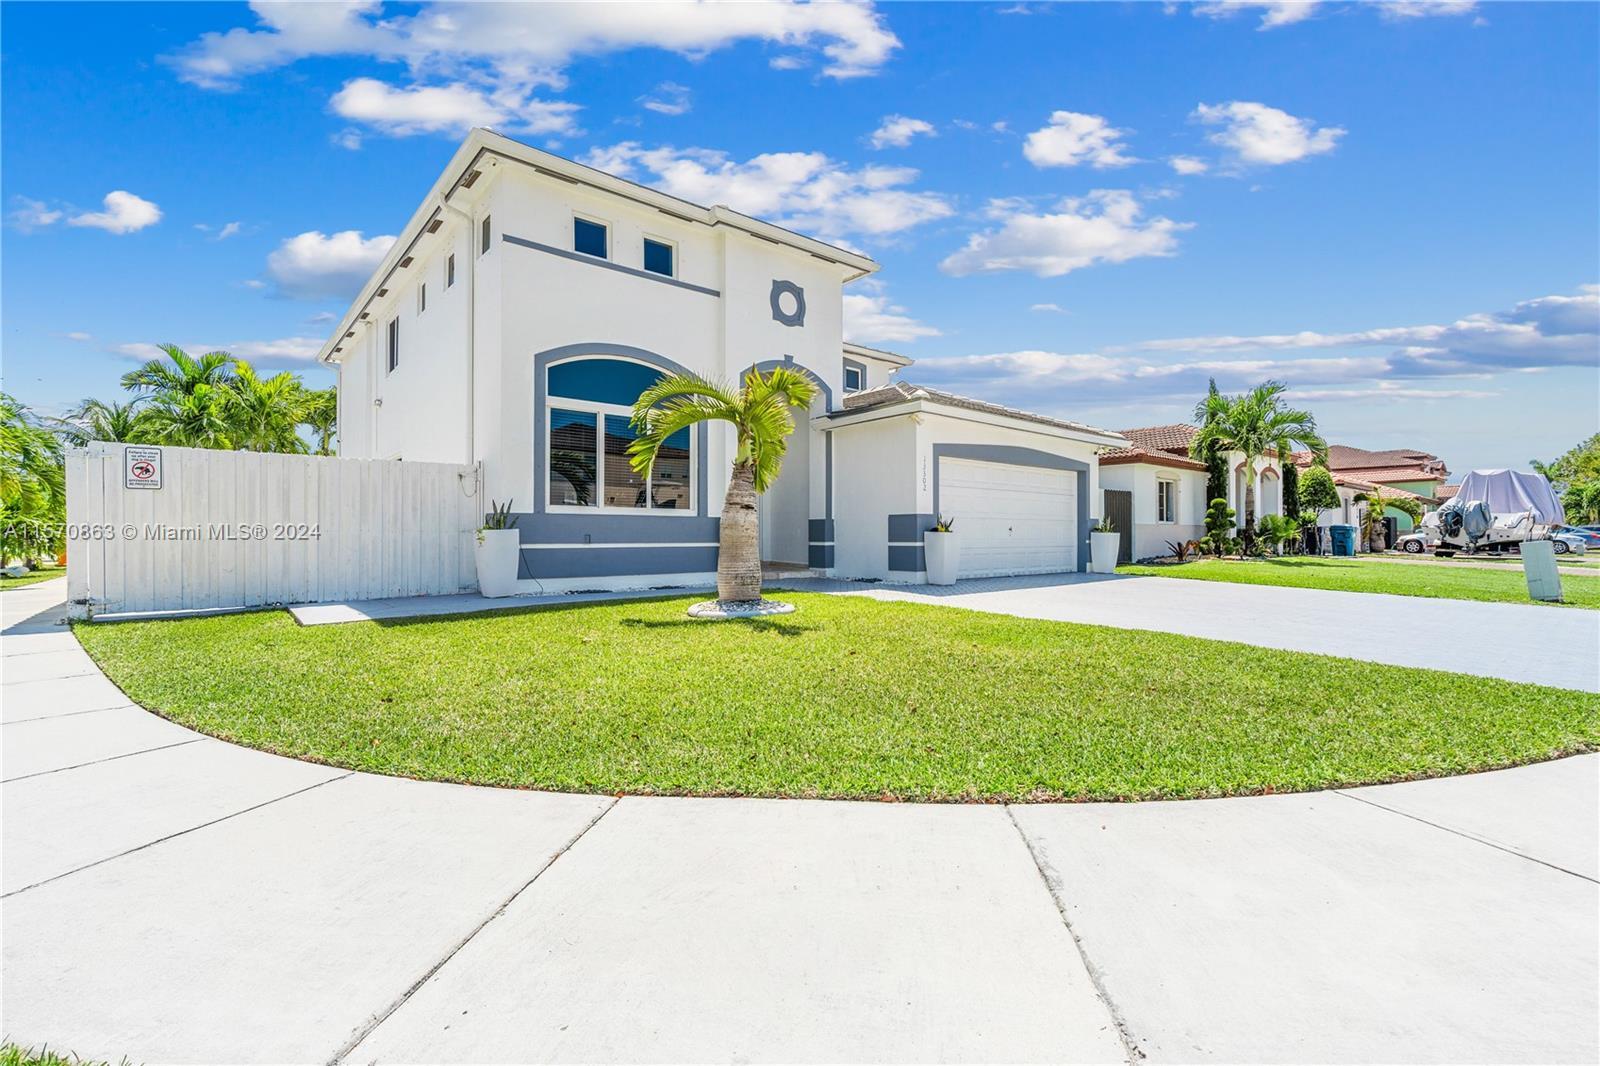 Photo of 13302 SW 283rd St in Homestead, FL